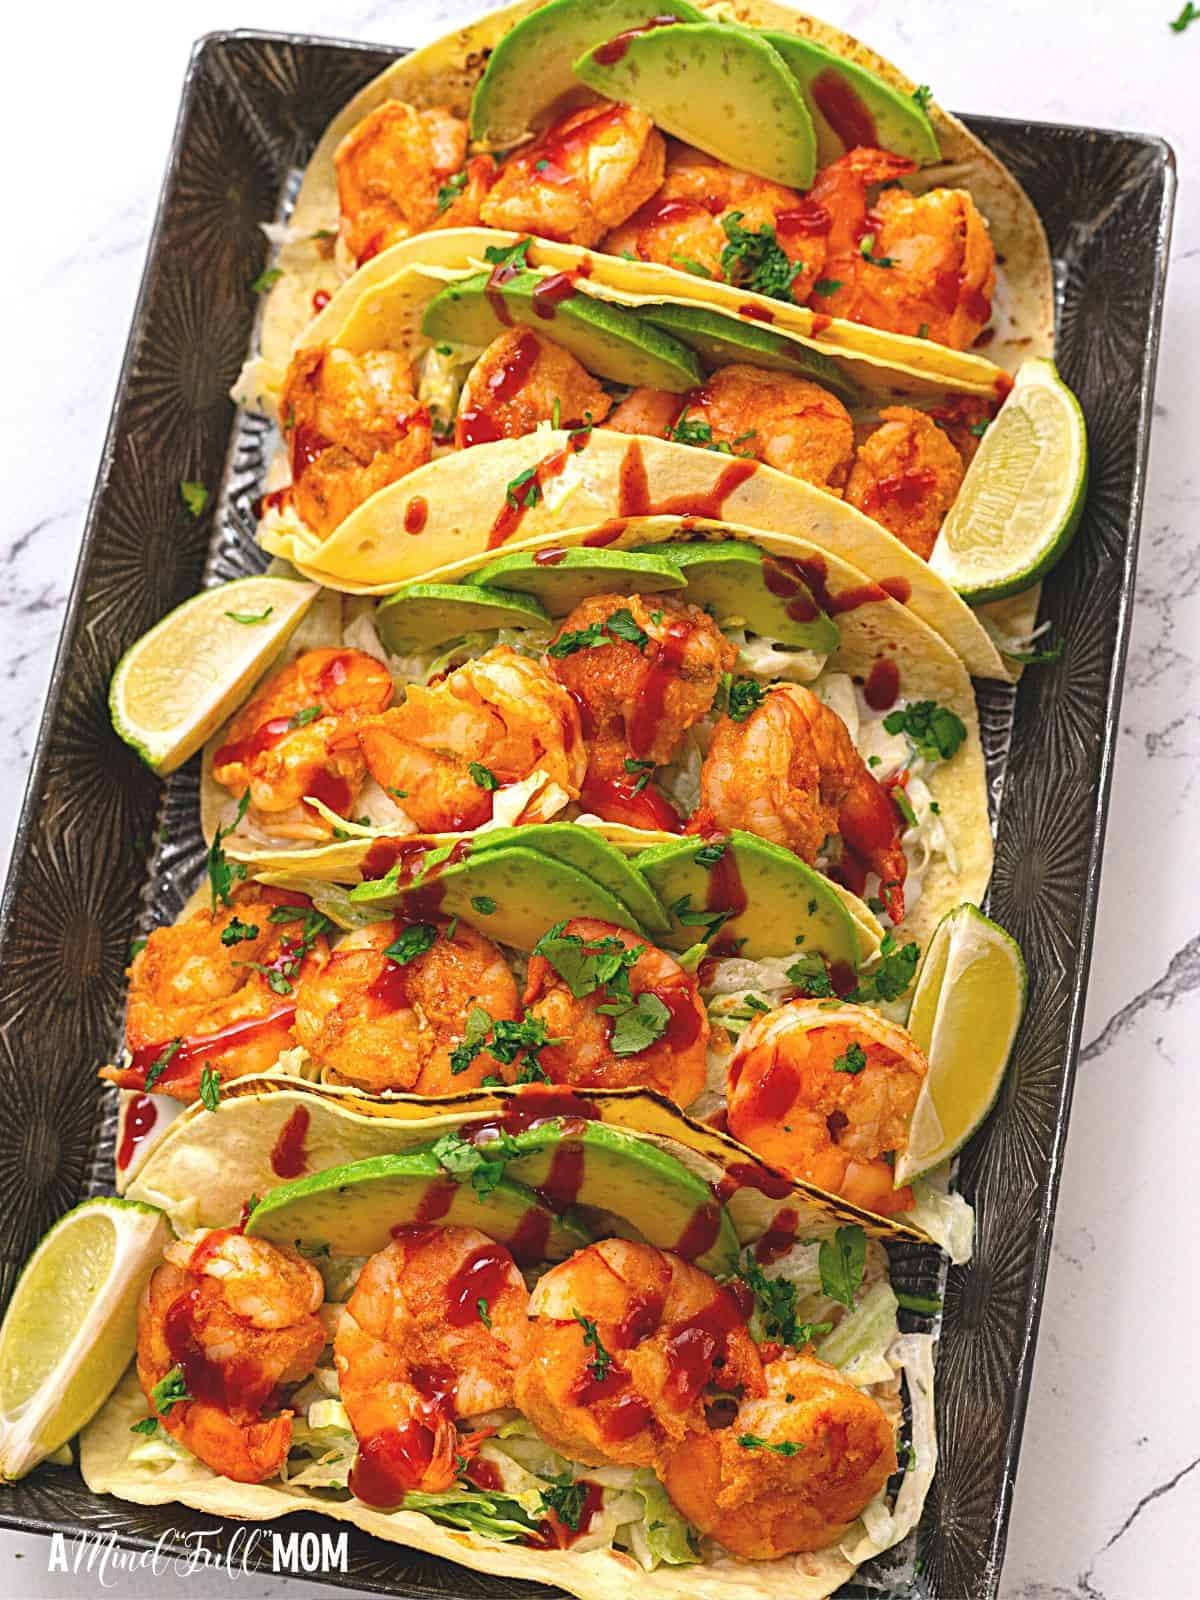 4 assembled shrimp tacos with avocado and slaw. 